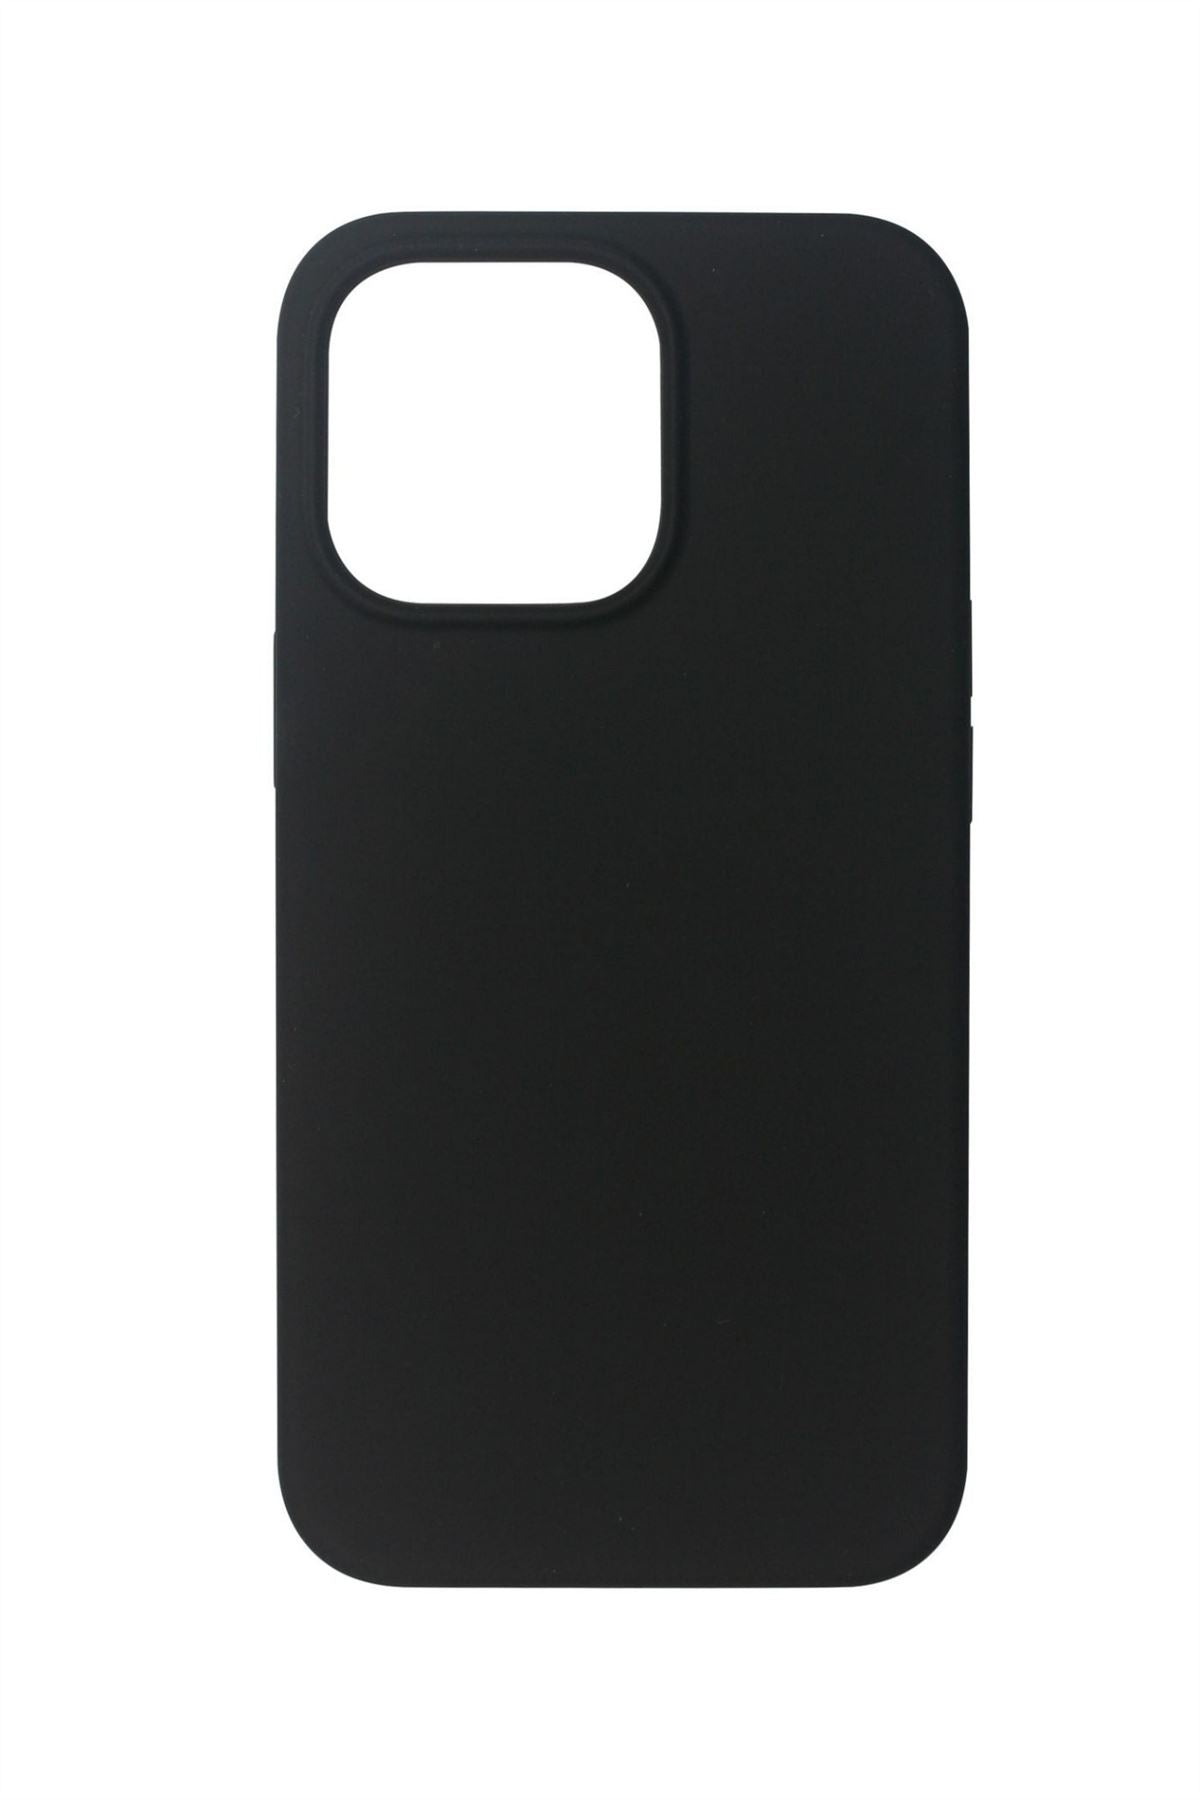 eSTUFF Black silk-touch silicone case for iPhone 13 Pro Max mobile phone case 17 cm (6.7&quot;) Cover